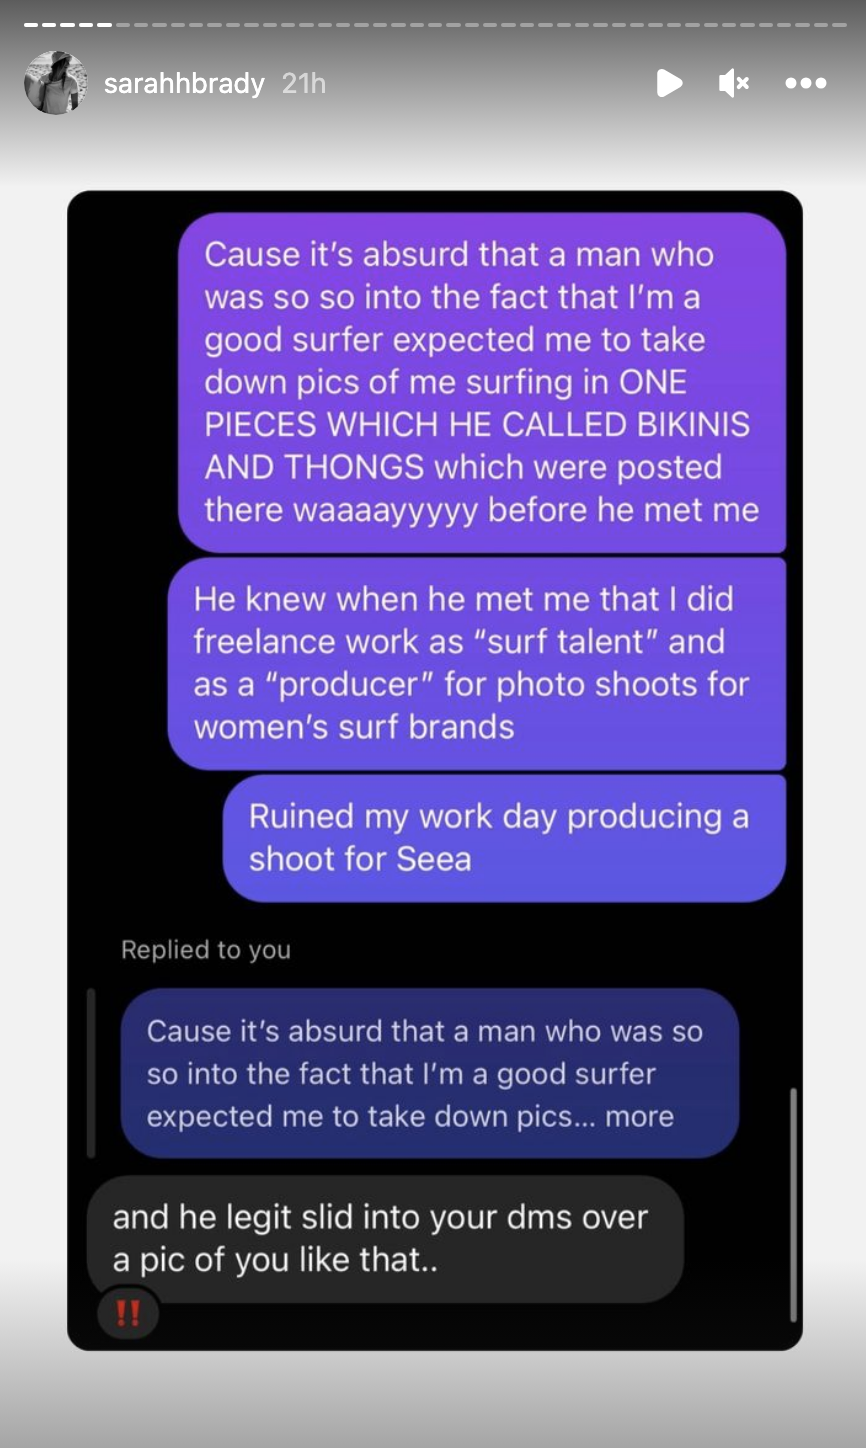 Sarah saying it&#x27;s absurd for a man who knew she was a surfer and freelanced as a &quot;surf talent&quot; who took photos to want her to take down the photos of her surfing